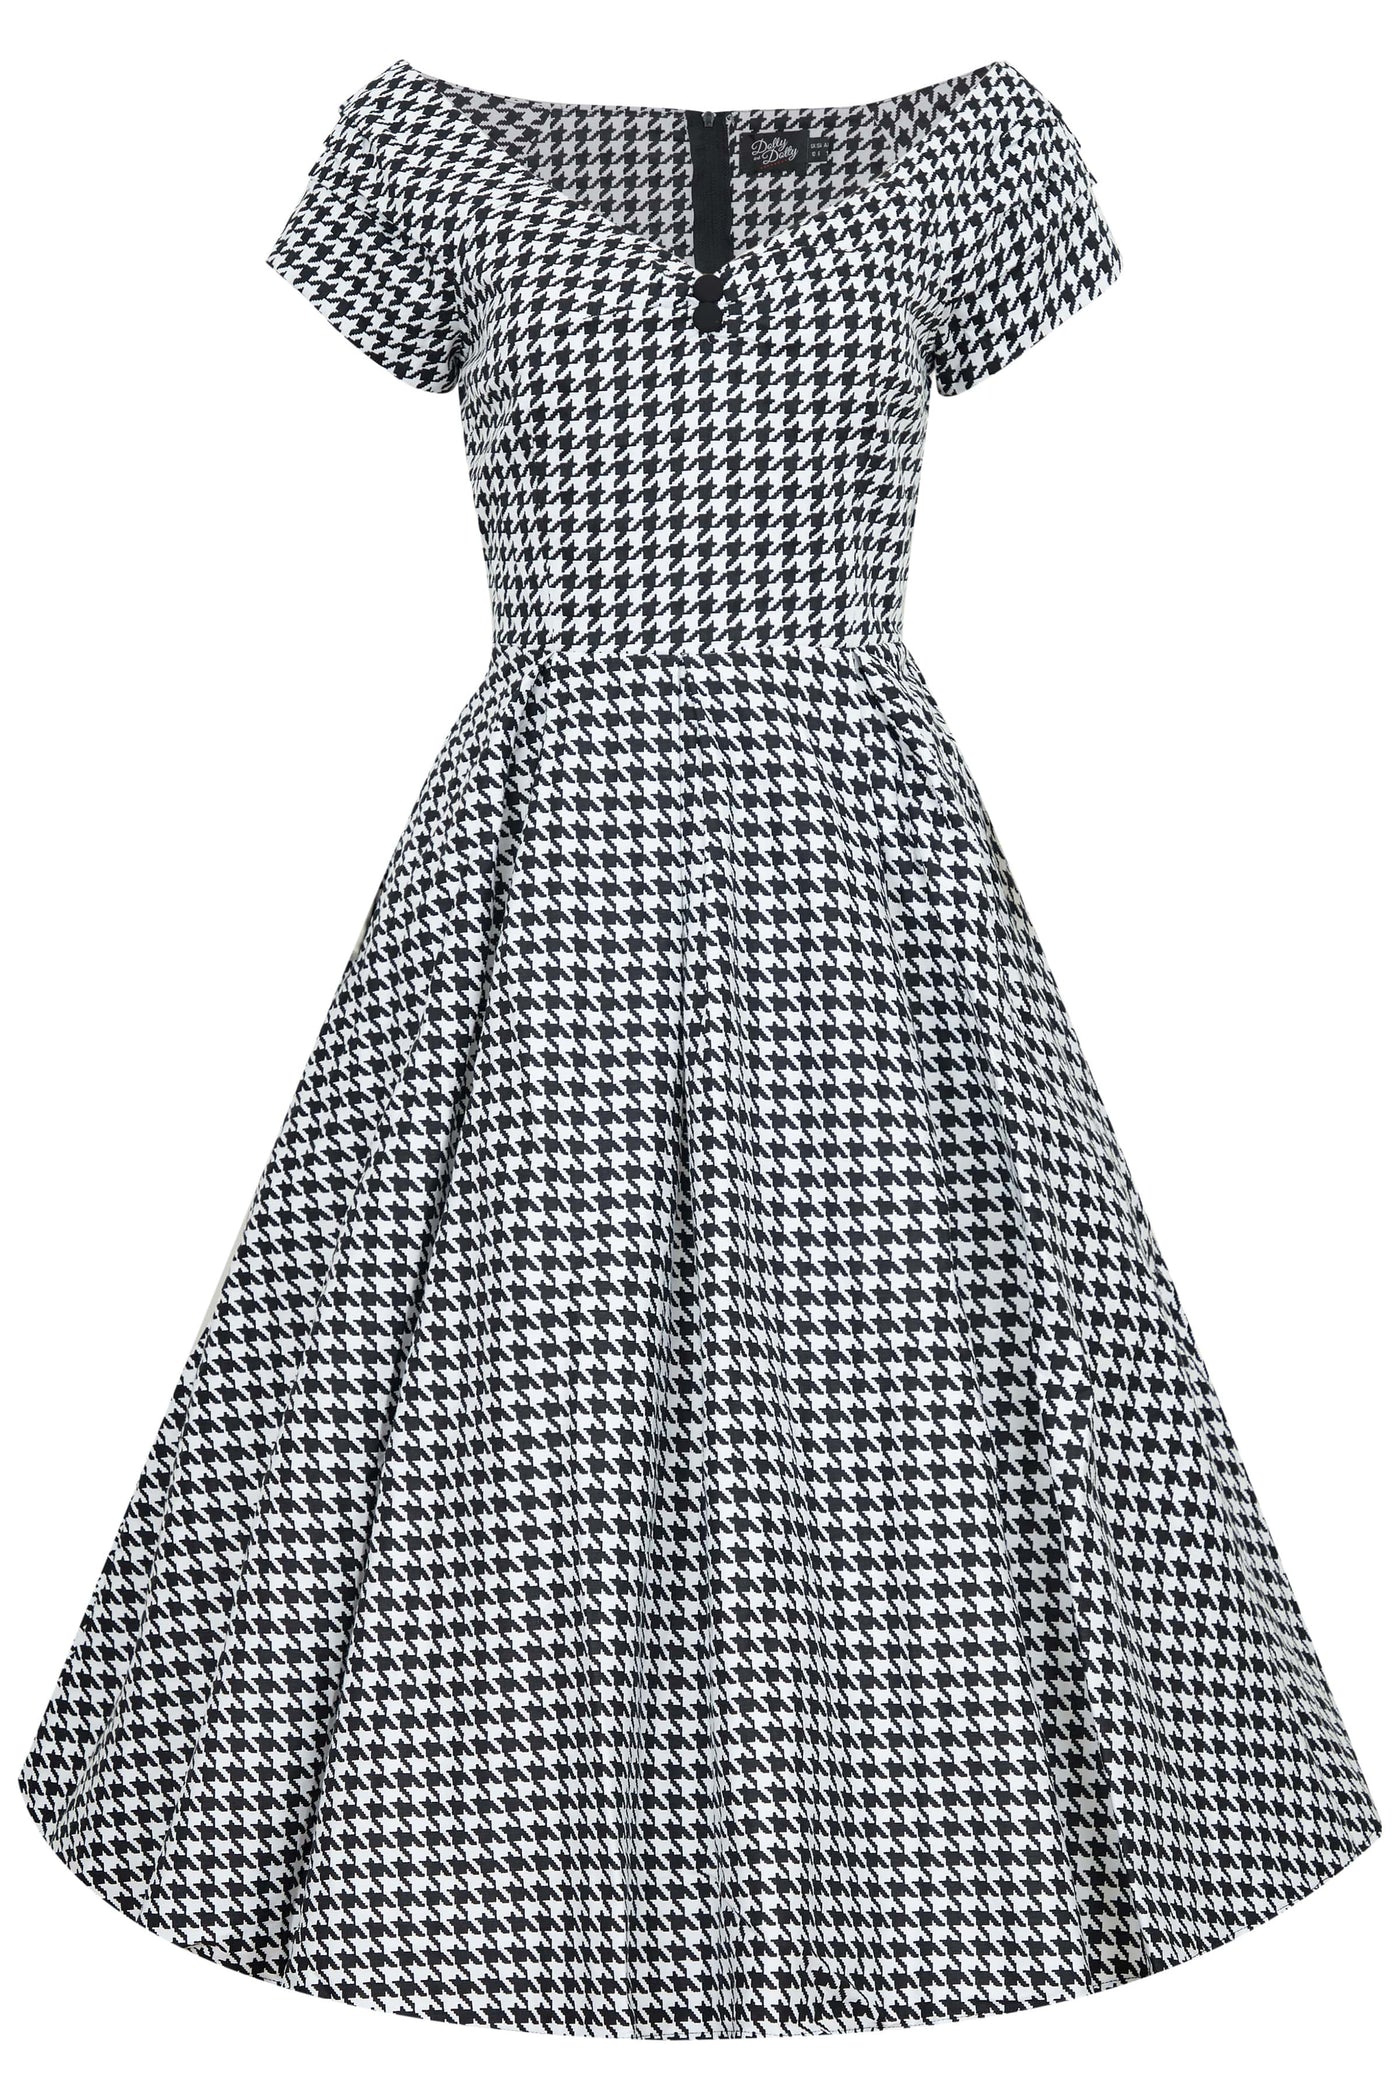 Houndstooth Midi Dress For Women front view